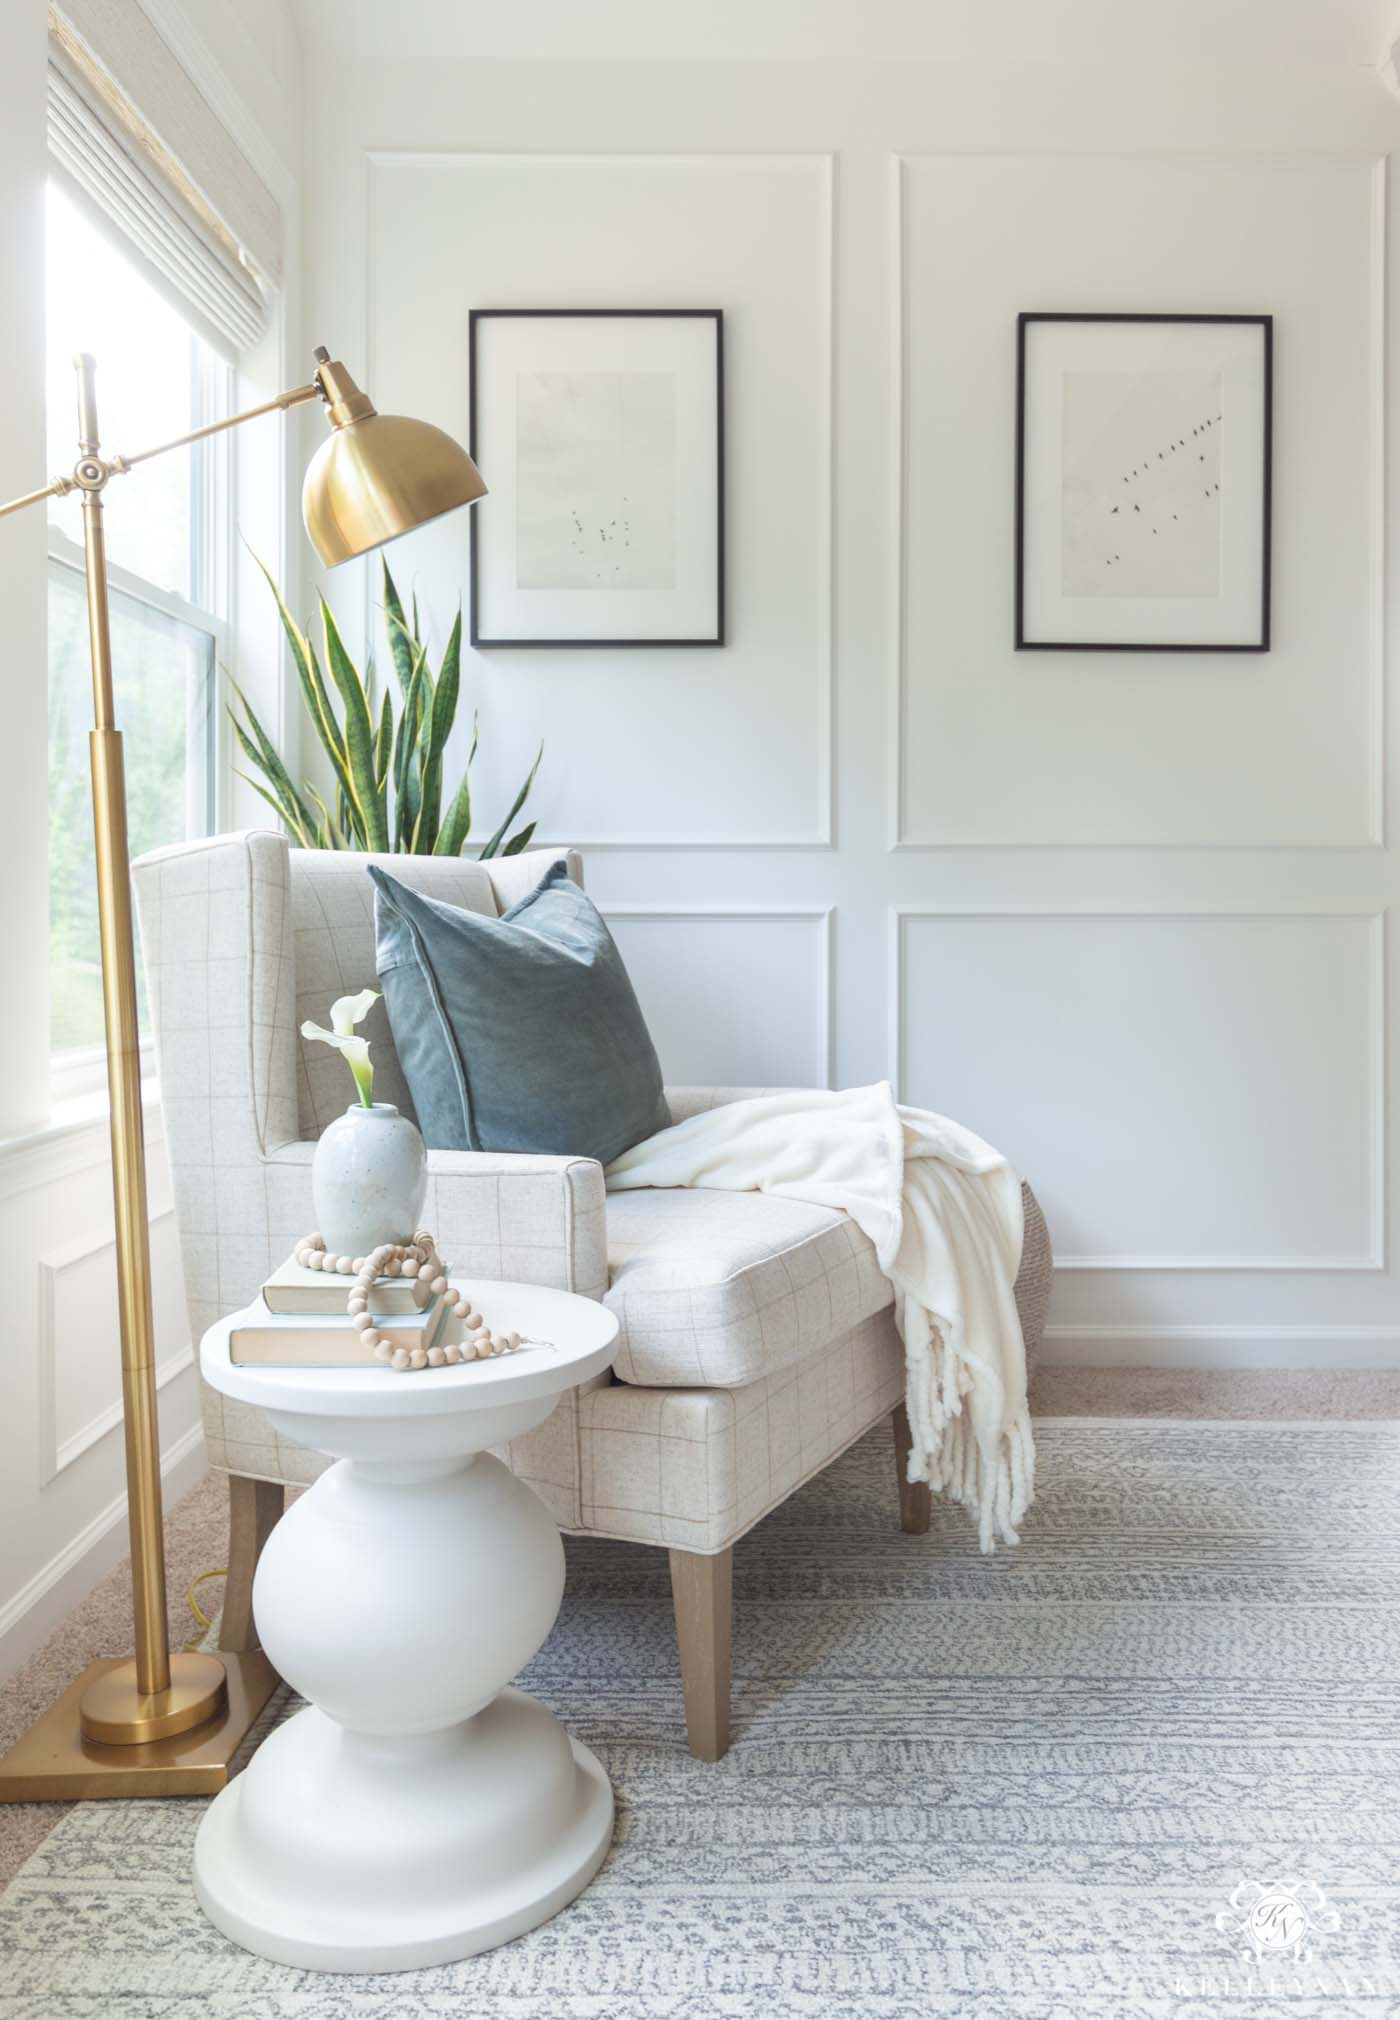 Benjamin Moore Simply White Paint in the Bedroom Sitting Area